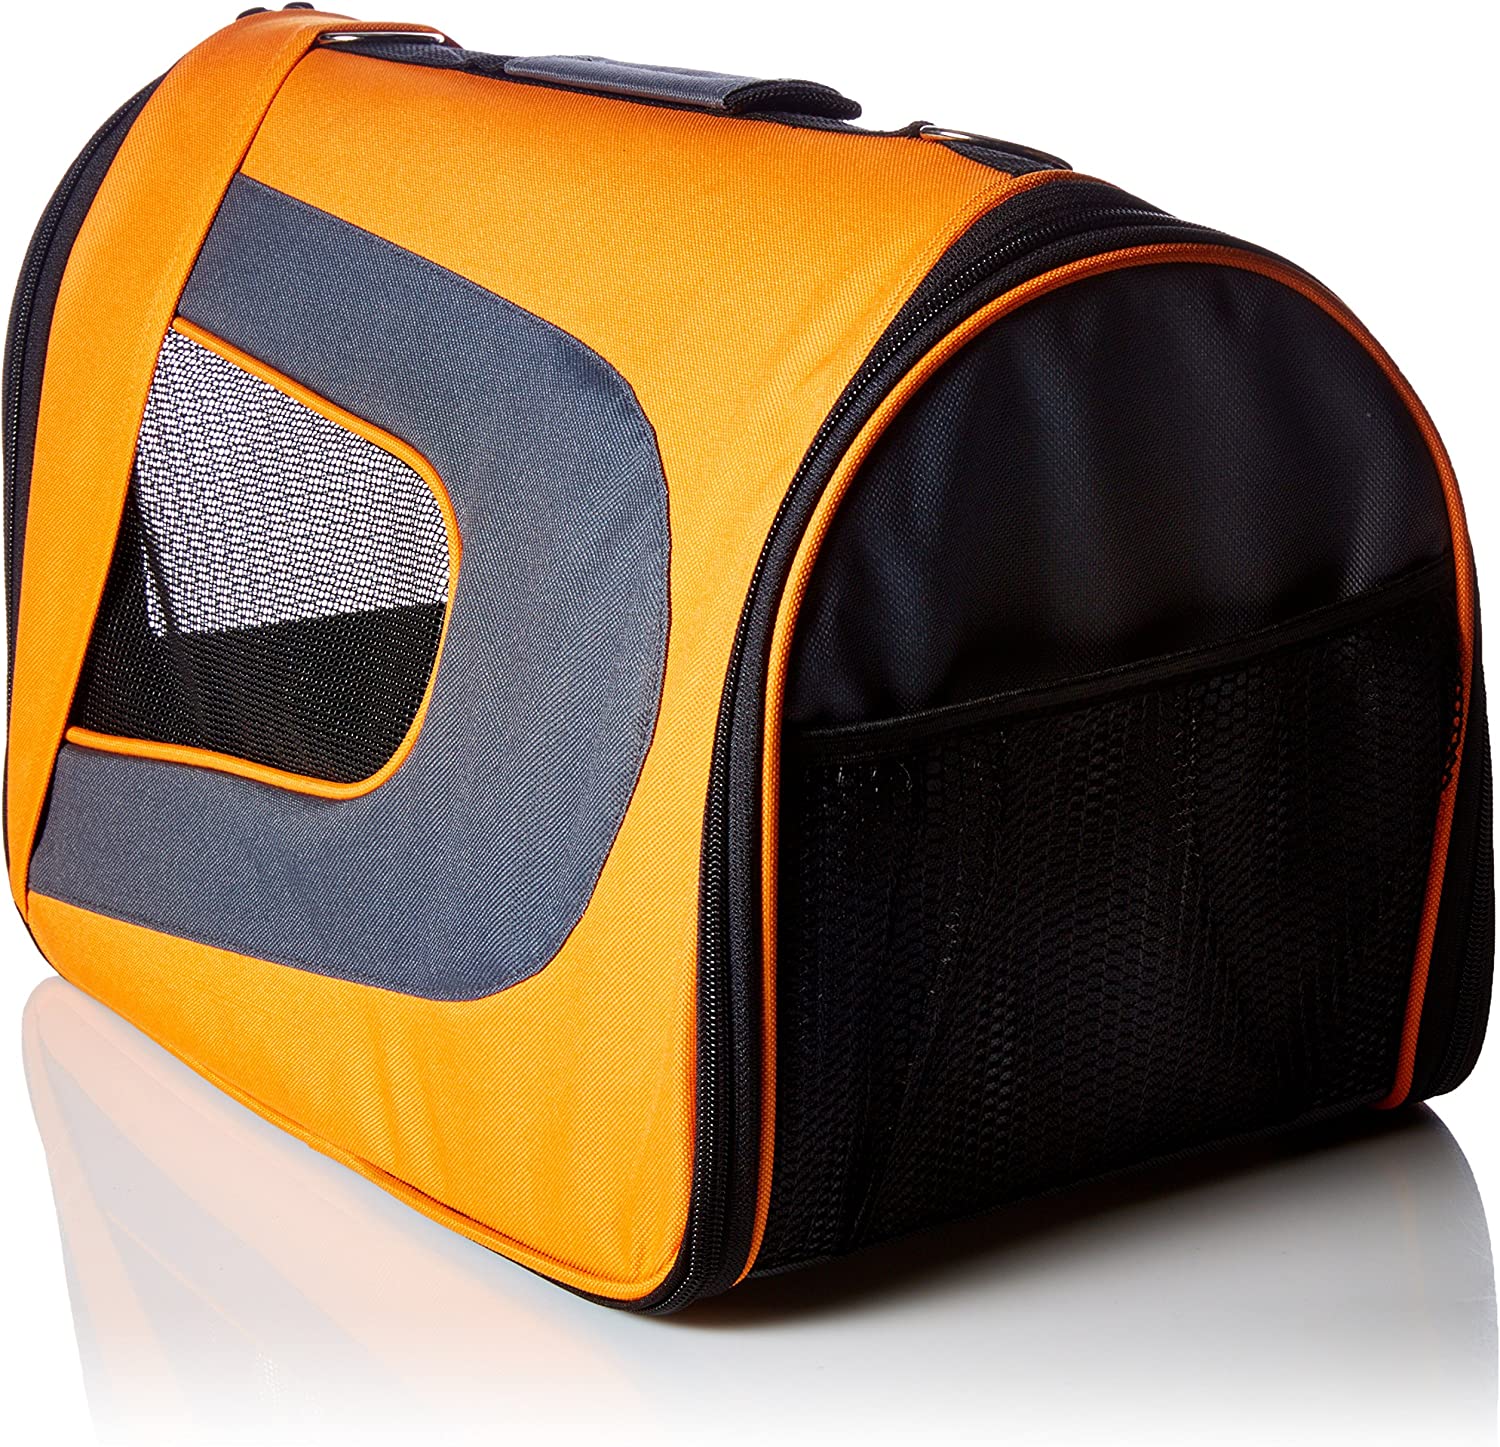 PET MAGASIN Soft-Sided Pet Travel Carrier